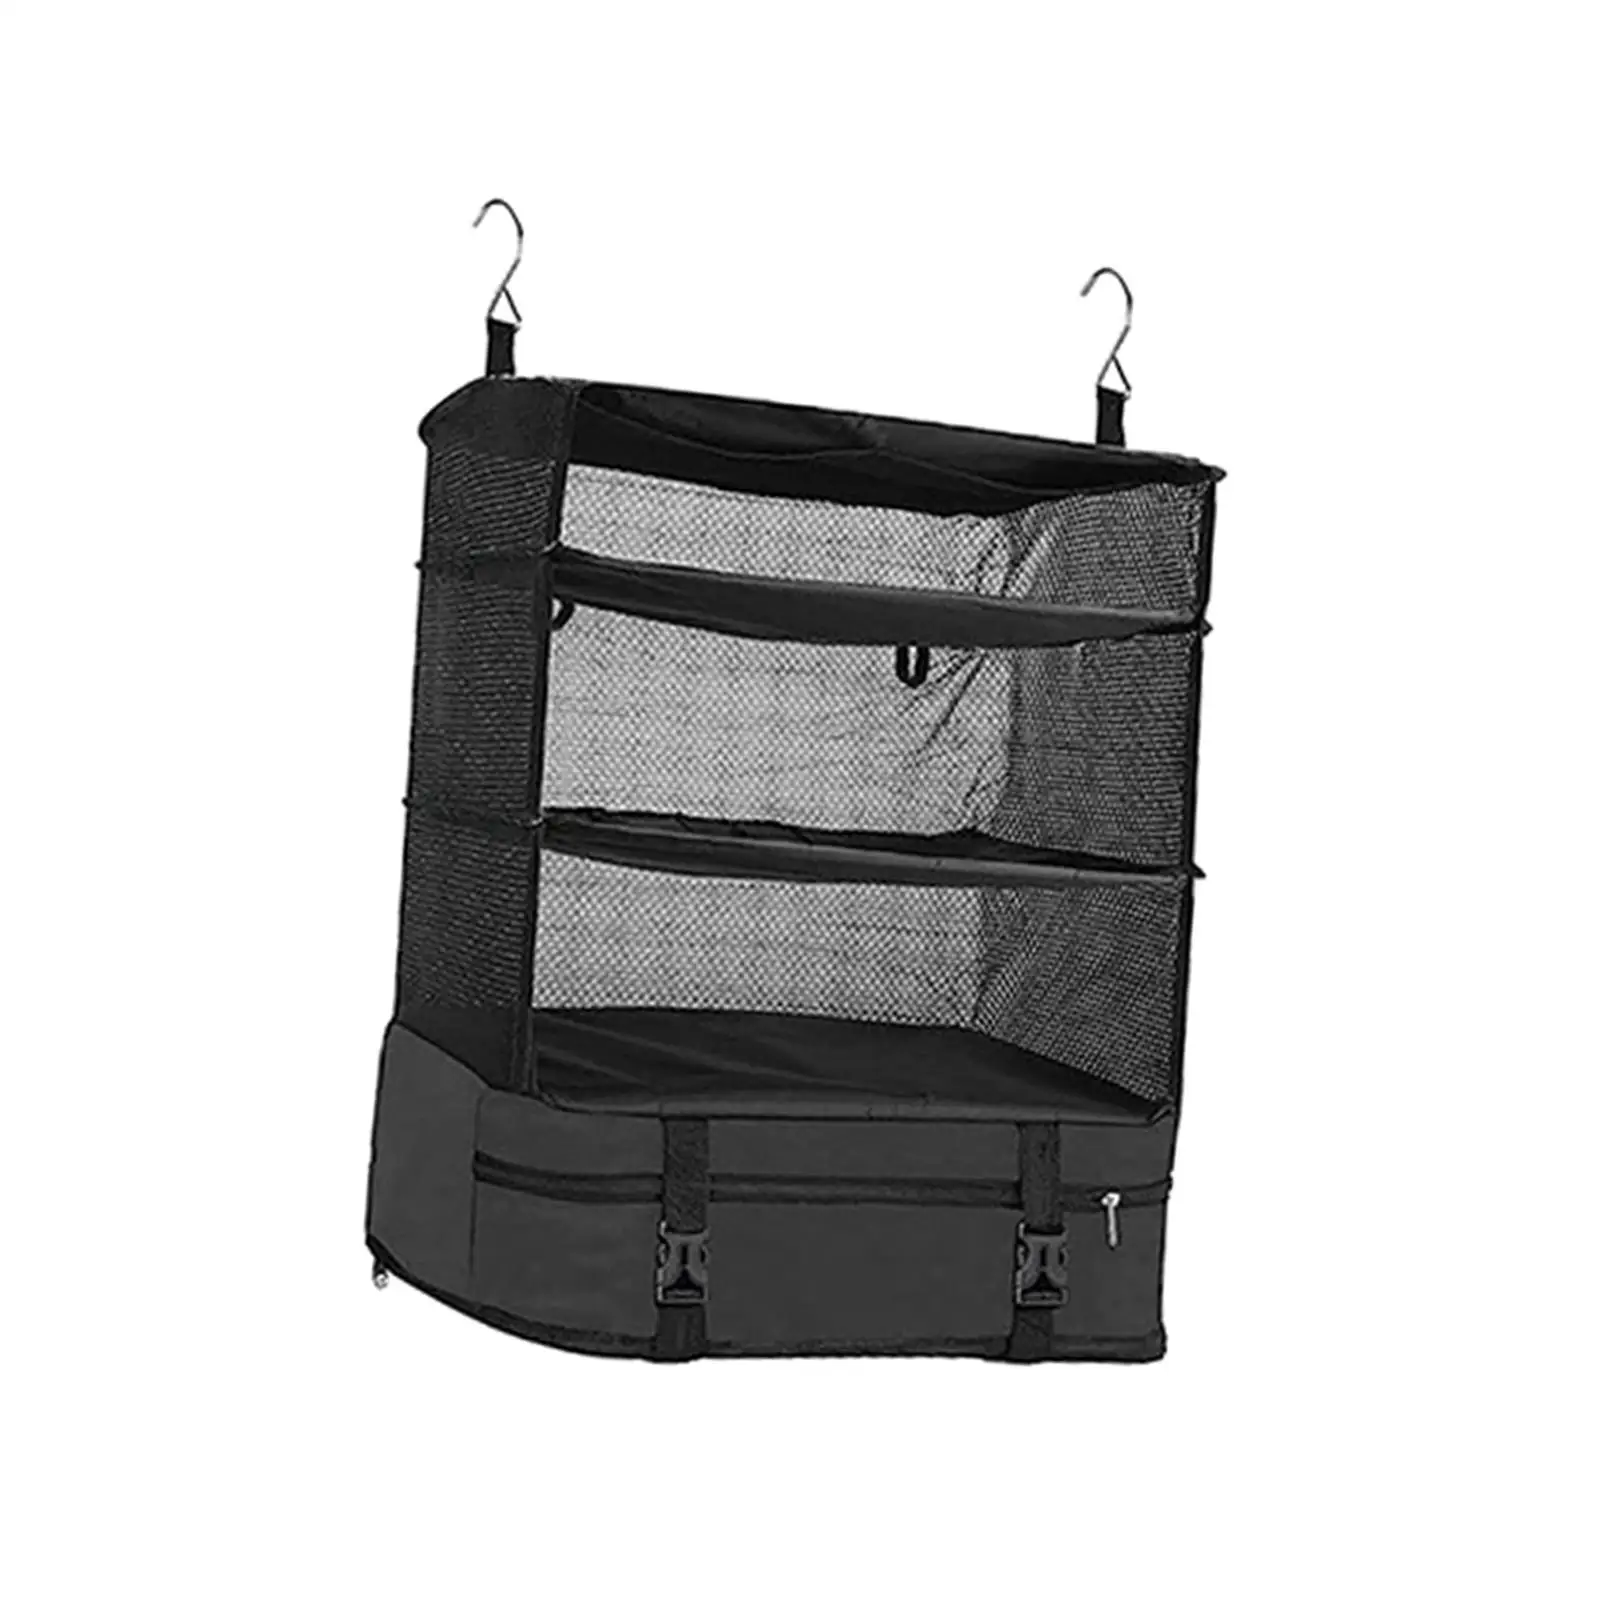 Hanging Travel Garment Shelves Travel Bags 3 Tier Hanging Closet Carry on Suitcase Packing Cubes for Travel Essentials